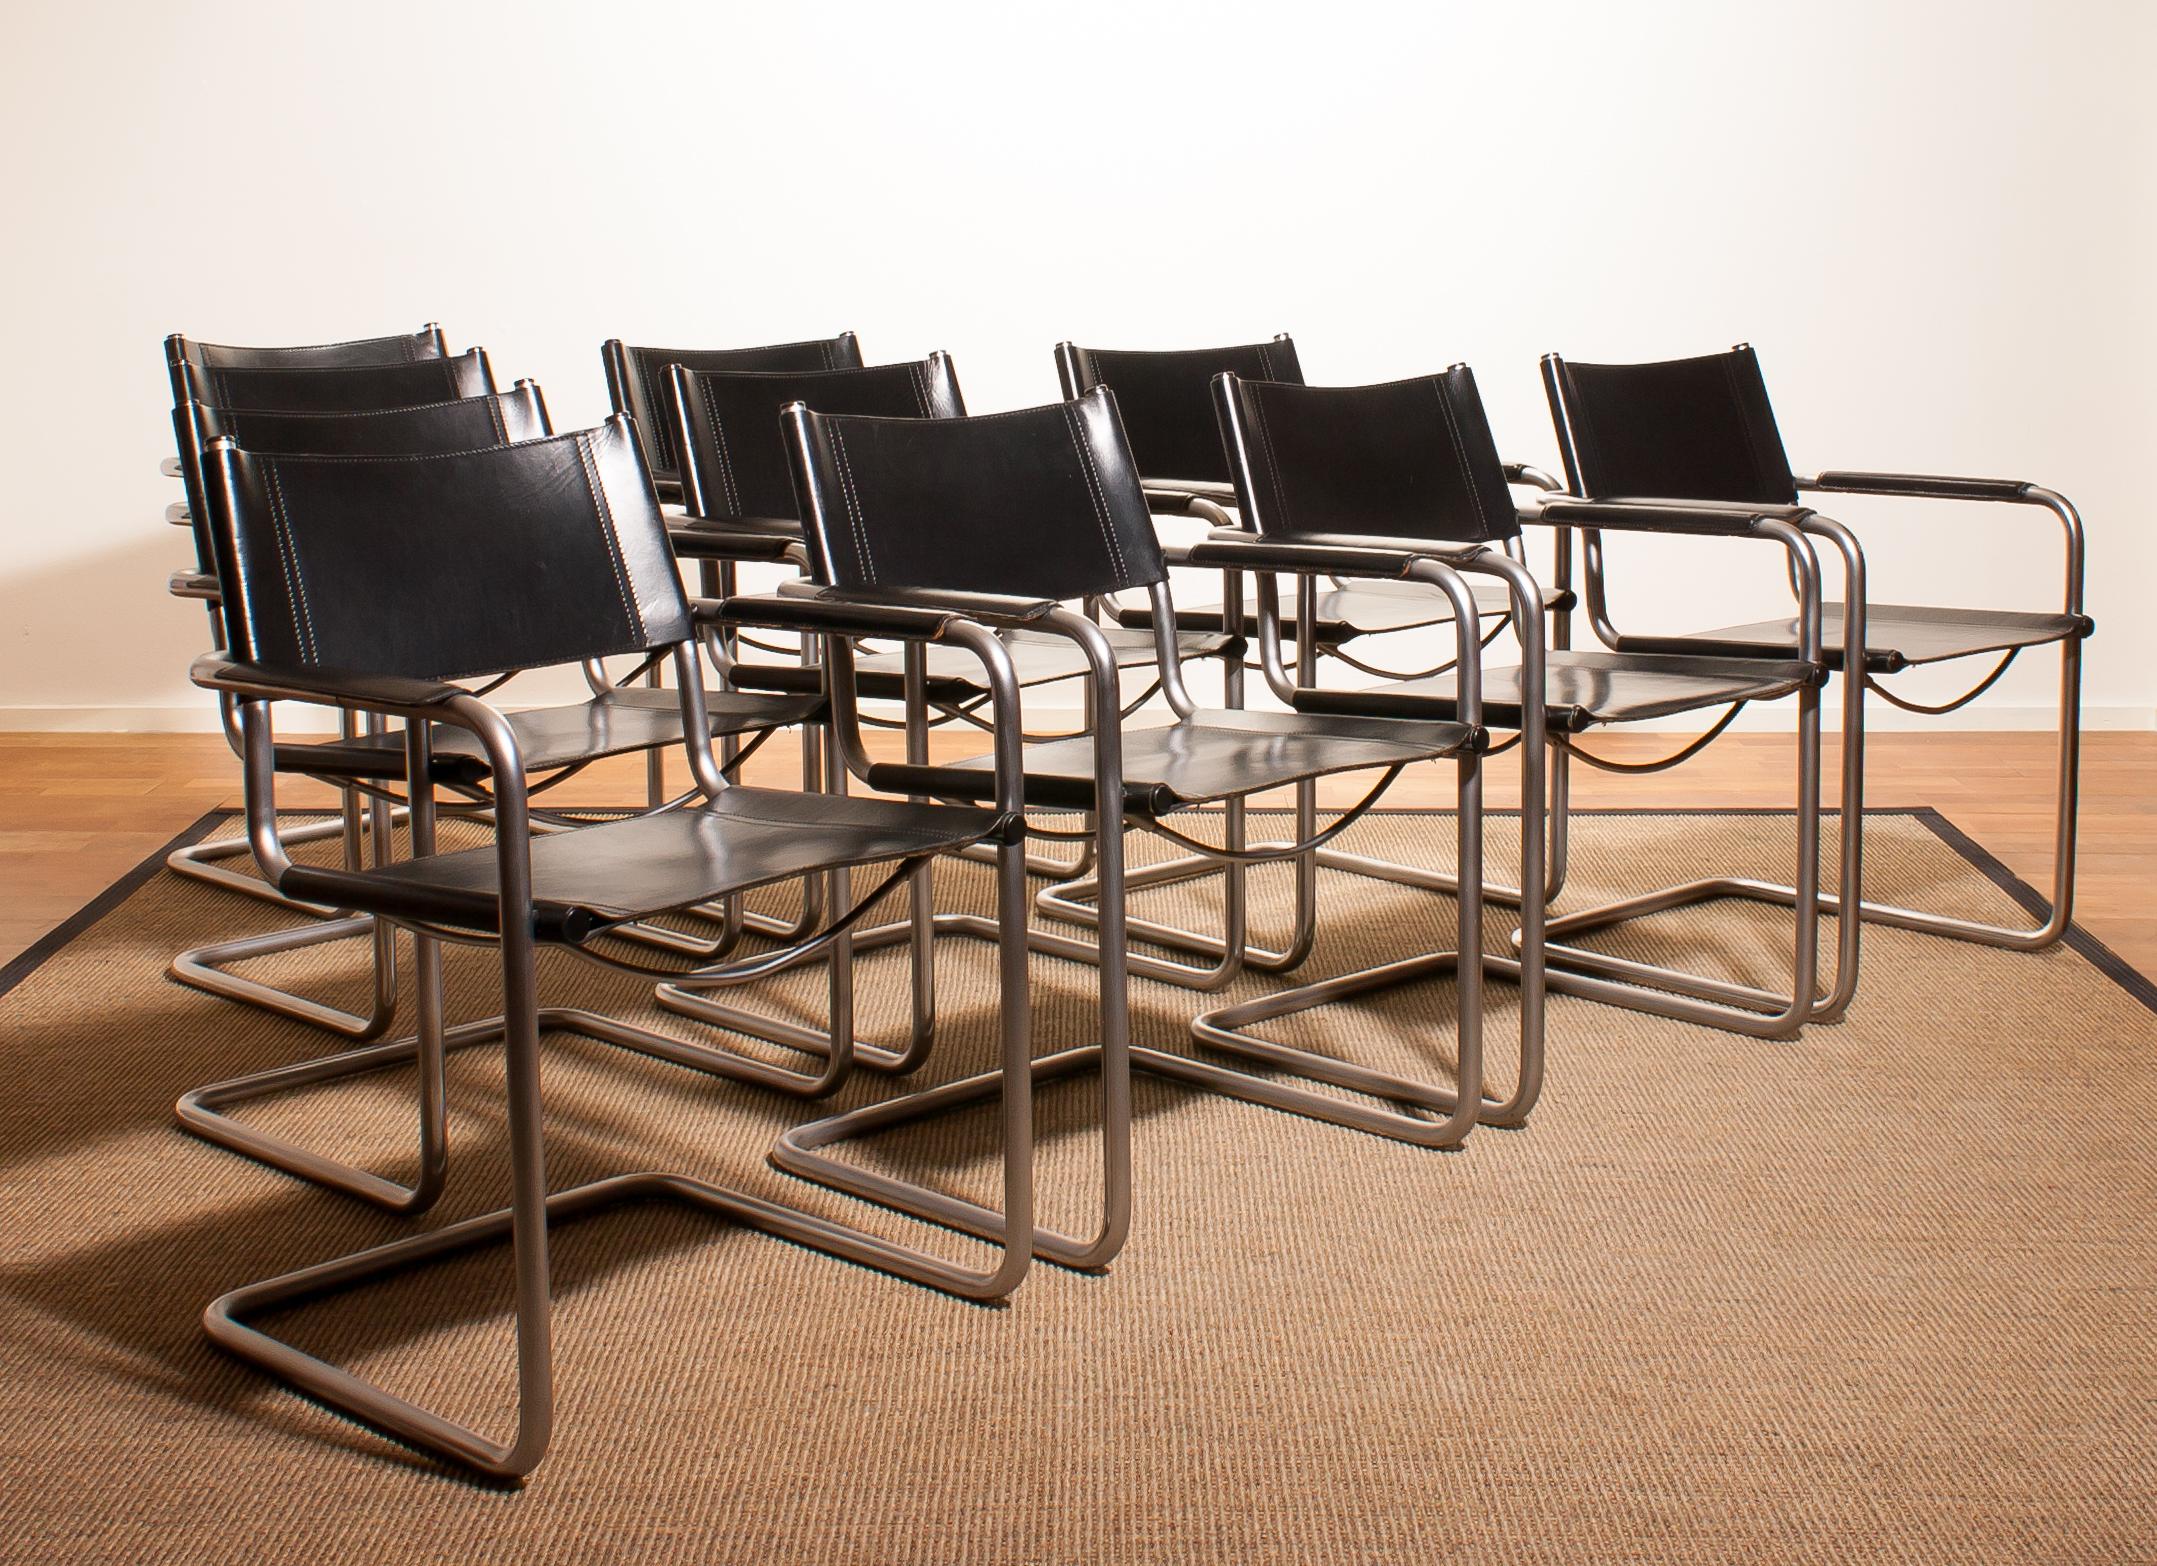 A beautiful set of ten dining chairs made by Matteo Grassi, Italy.
The chairs have tubular titanium look steel frames with sturdy black leather seating and back and armrest.
They are signed on the back of the backrest.
The chairs are in a very